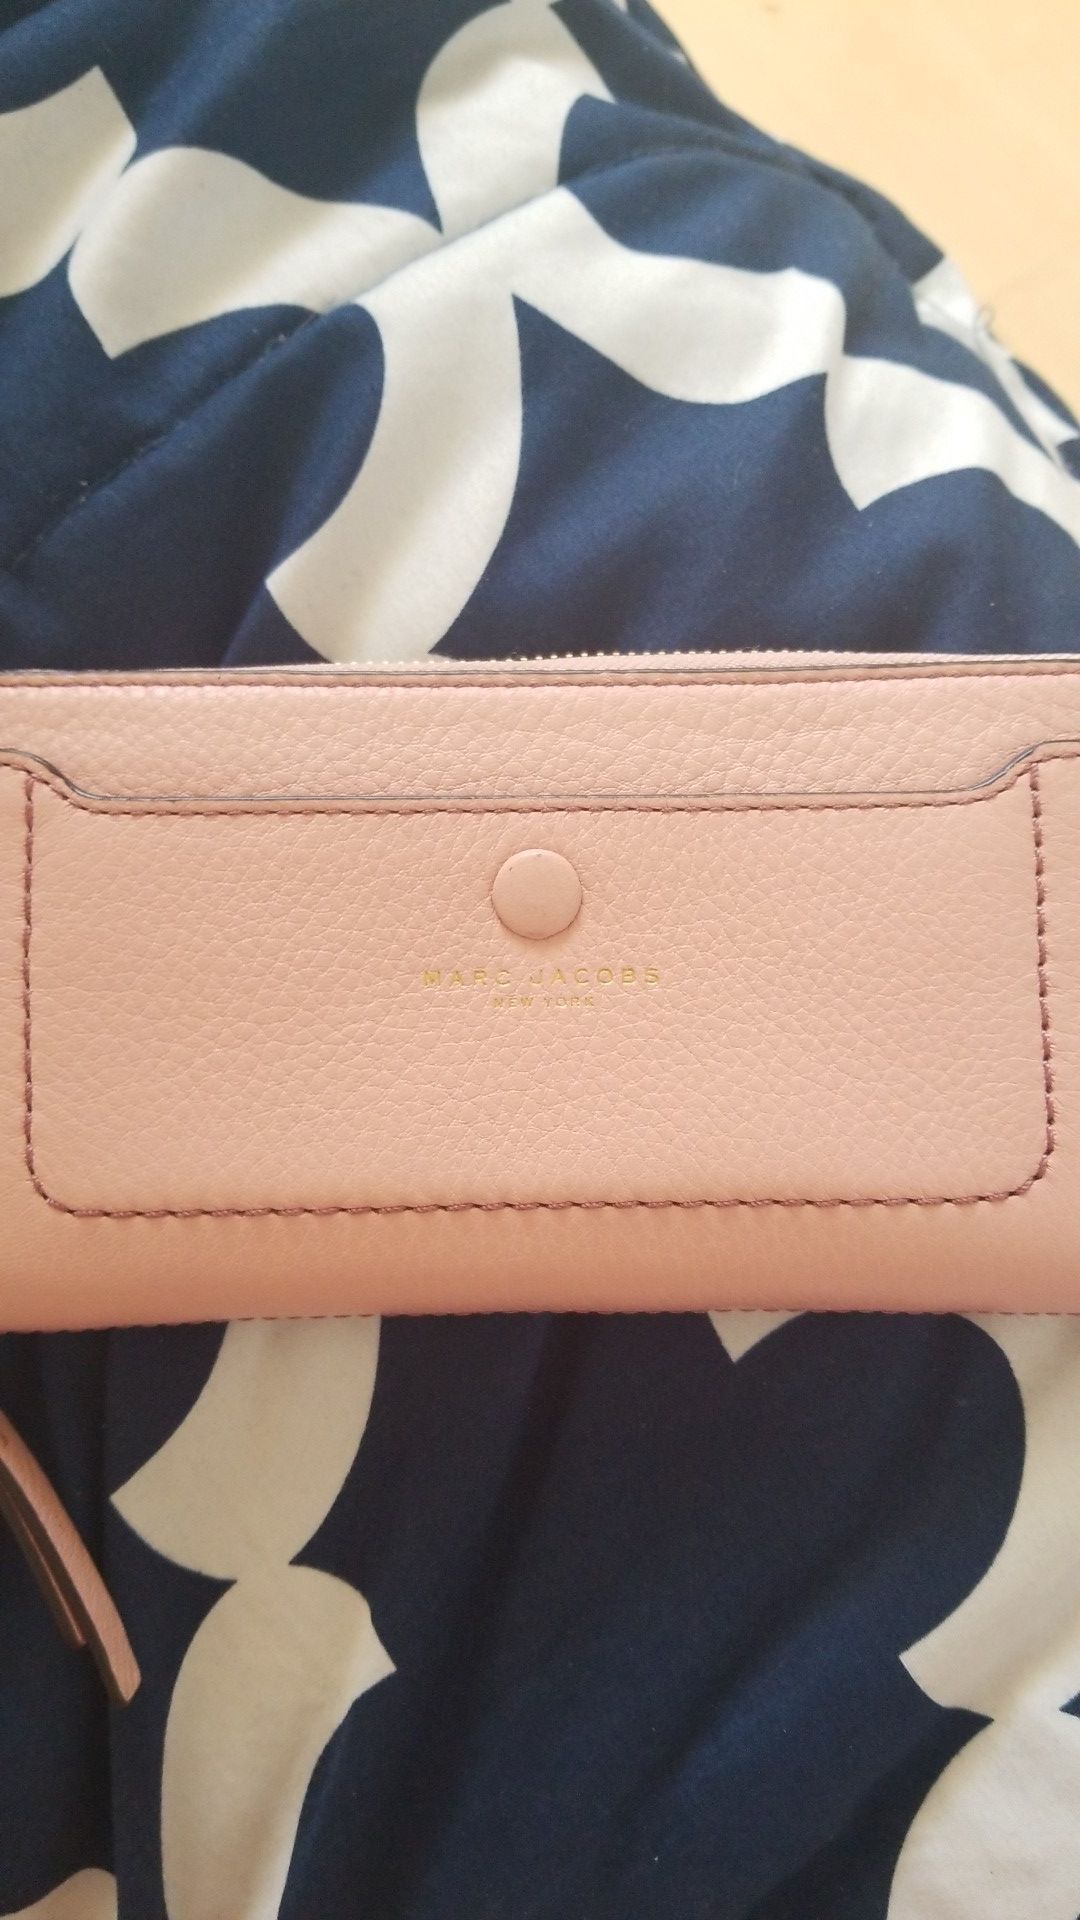 Brand new Marc Jacob's womens wallet.